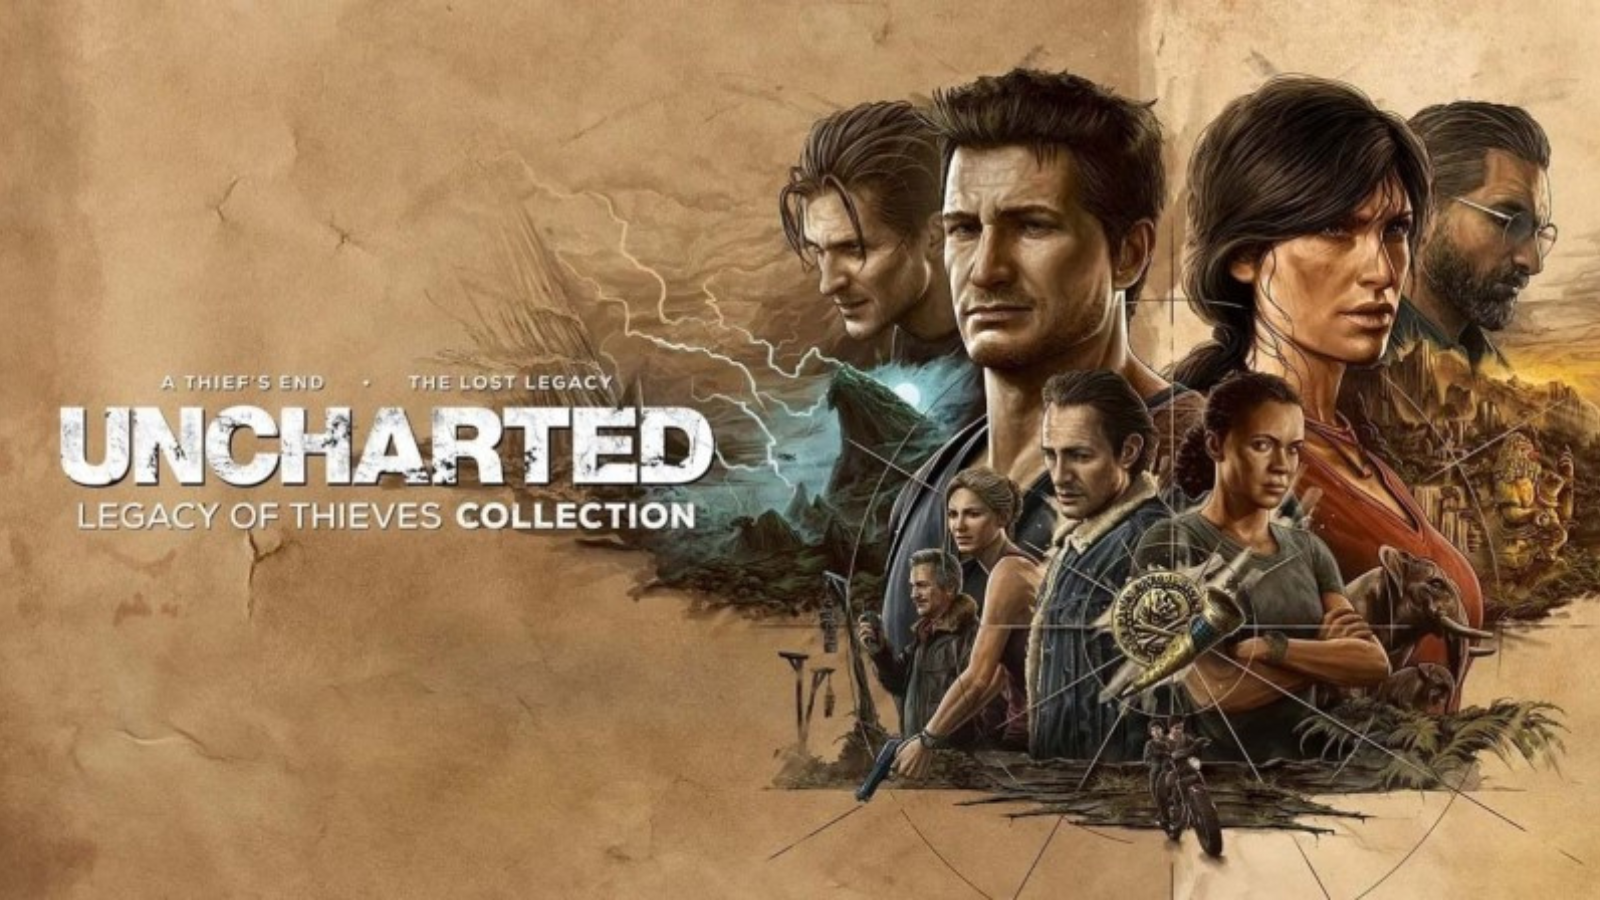 UNCHARTED 4 (Steam) Price in India - Buy UNCHARTED 4 (Steam) online at